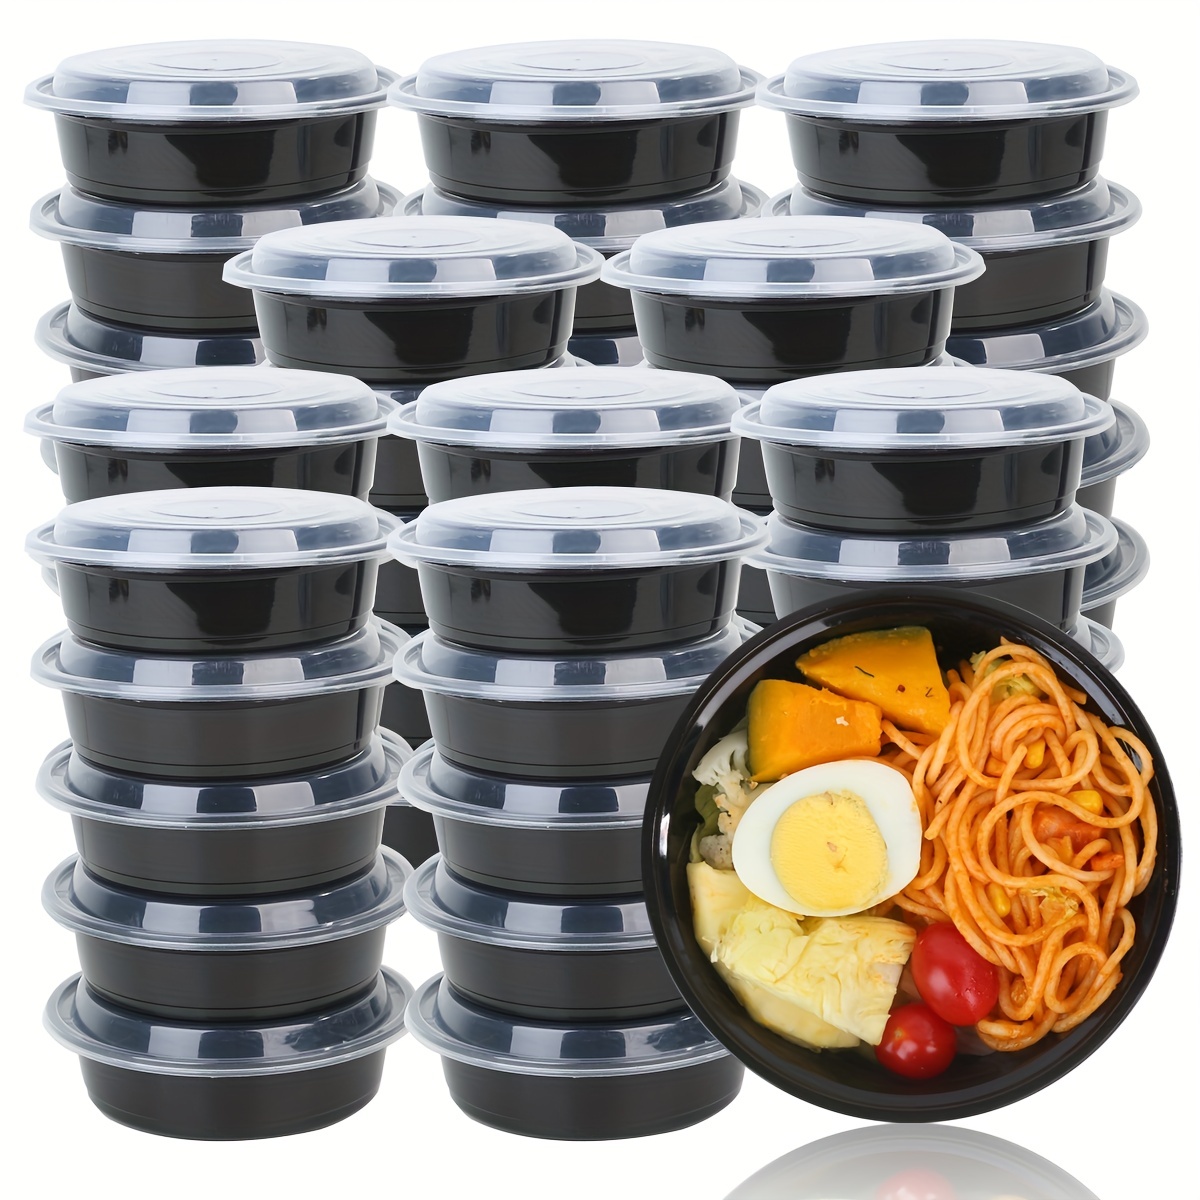 10pcs Disposable lunch box Degradable meal prep containers divider